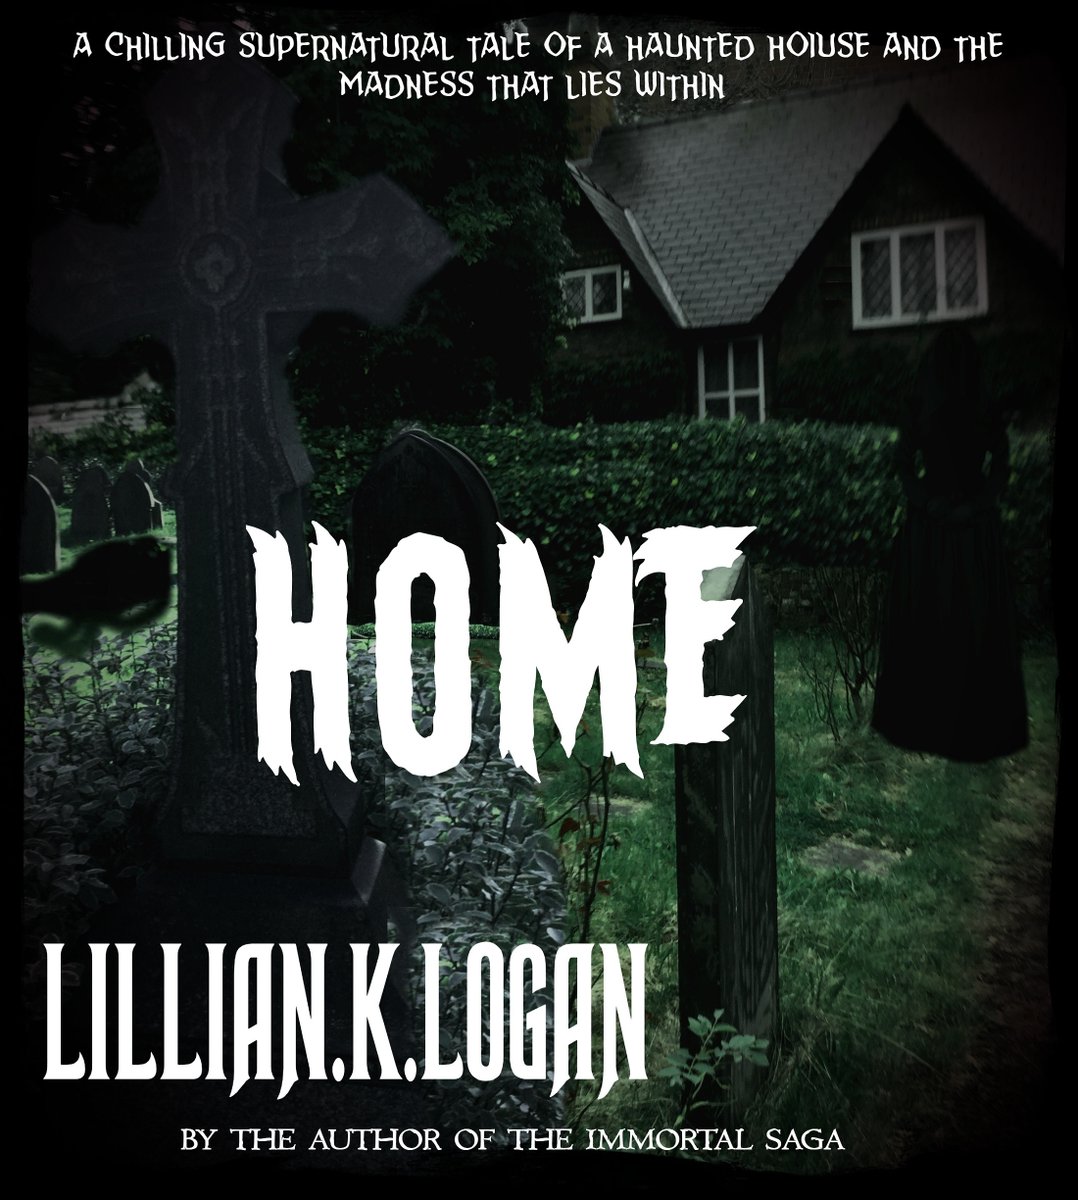 amazon.co.uk/Home-Lillian-k…

A Chilling Supernatural tale of a Haunted House and the Madness That Lies Within.

Some people are born wrong, are born evil, are born twisted and broken, and cannot be fixed.

#ghosts #haunting #ghostbooks #horror